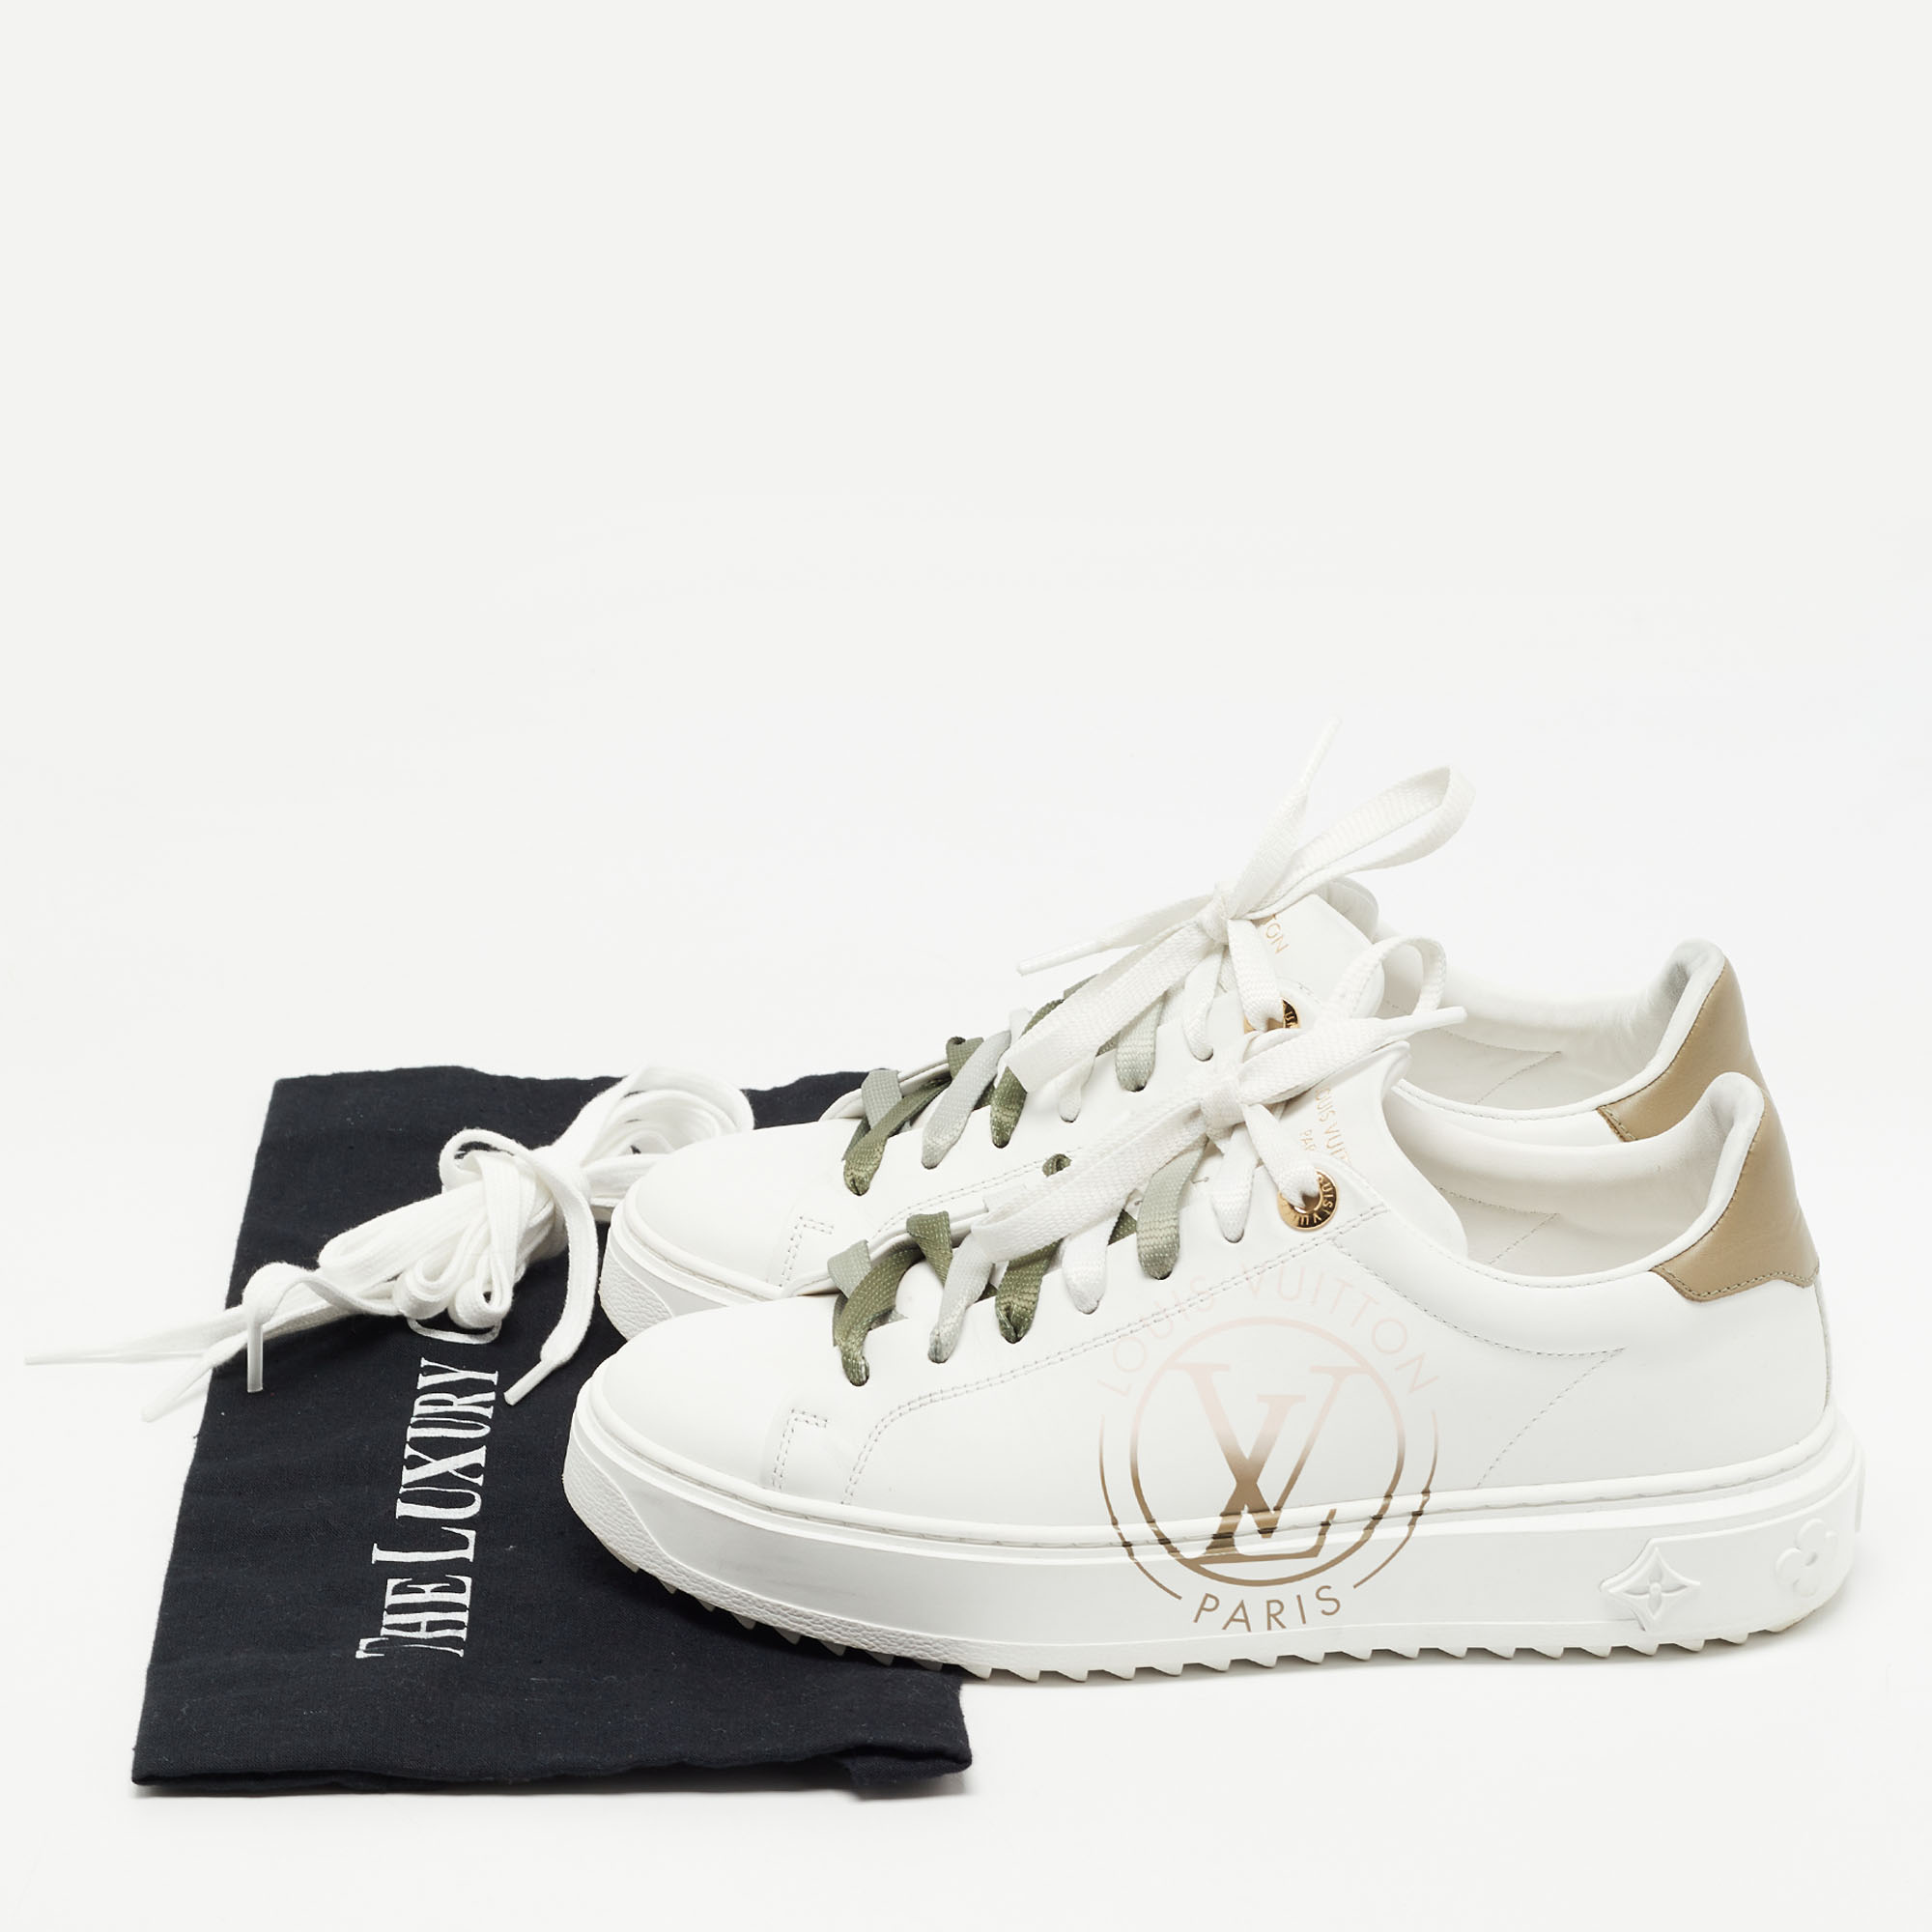 Louis Vuitton Time Out Sneakers Athletic White Shoes Sz 37 AUTHENTIC❤️